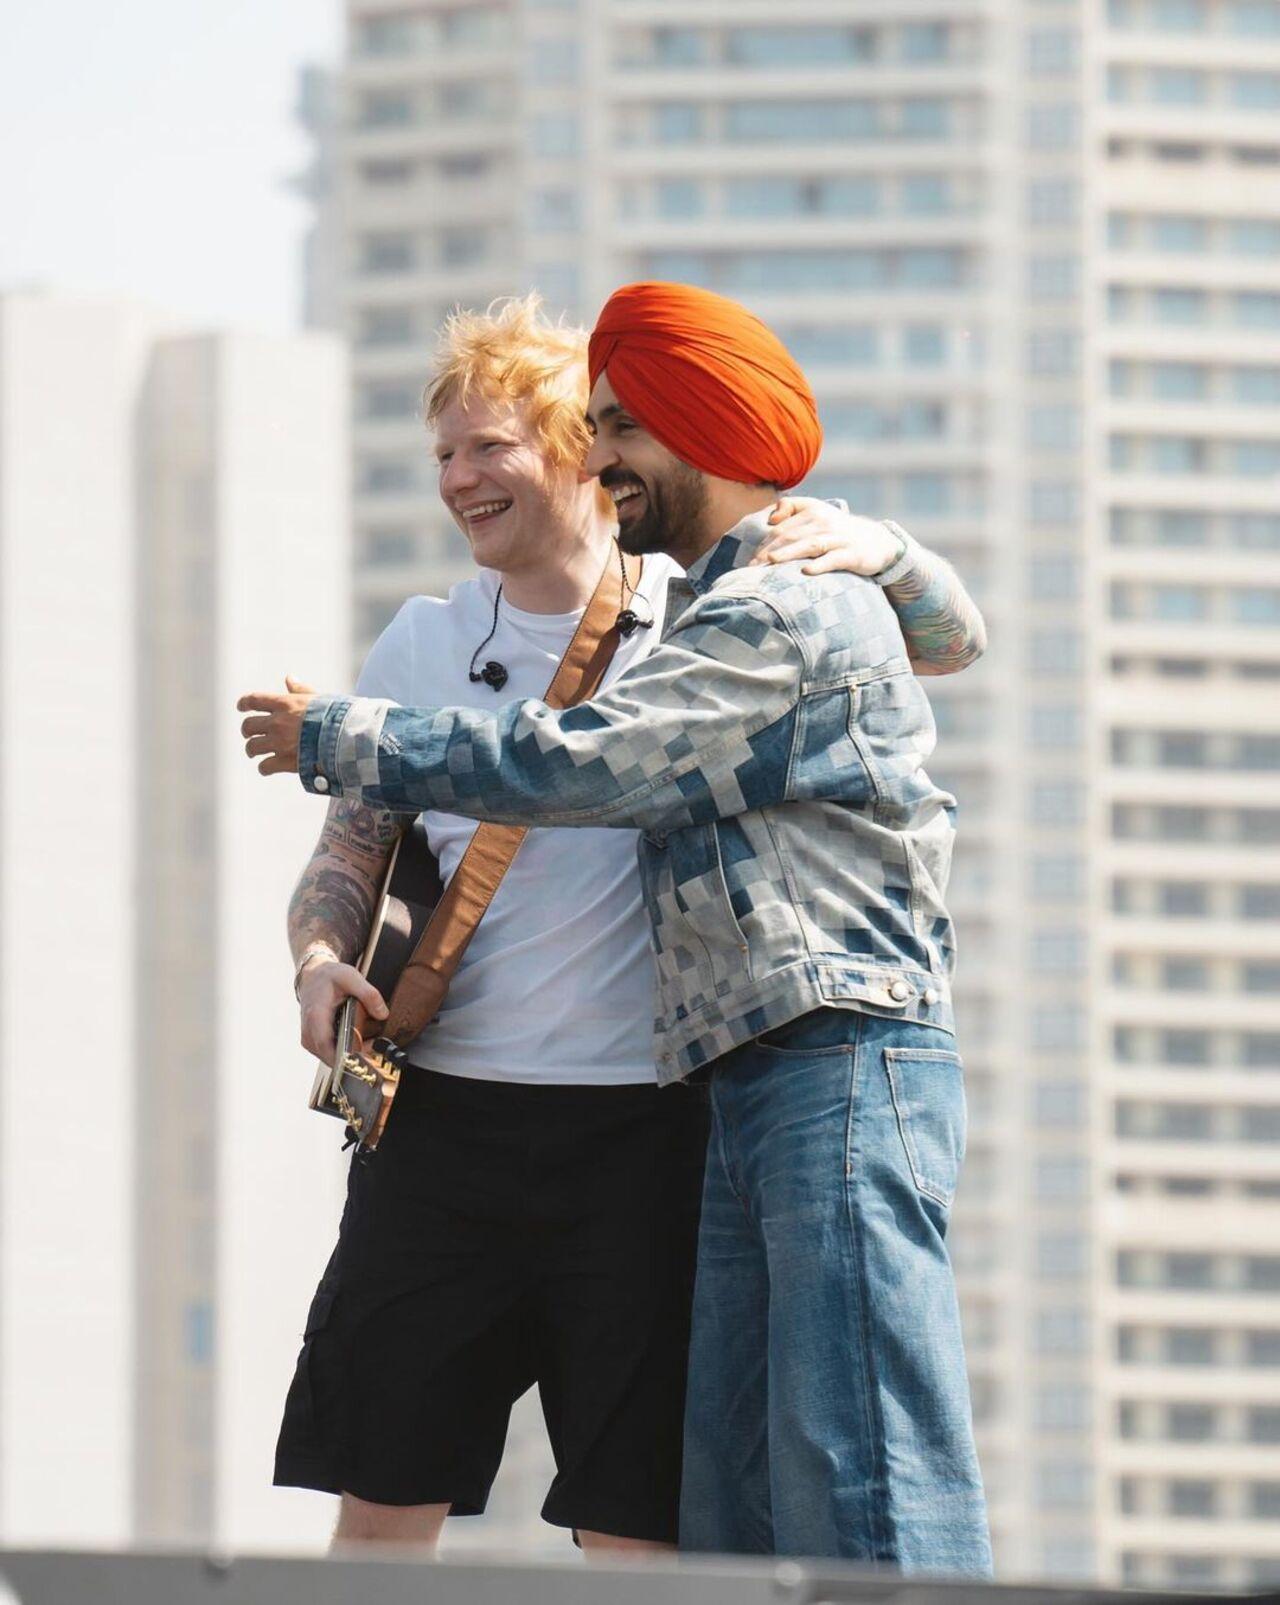 Diljit and Ed have a light-hearted moment while on stage during rehearsals